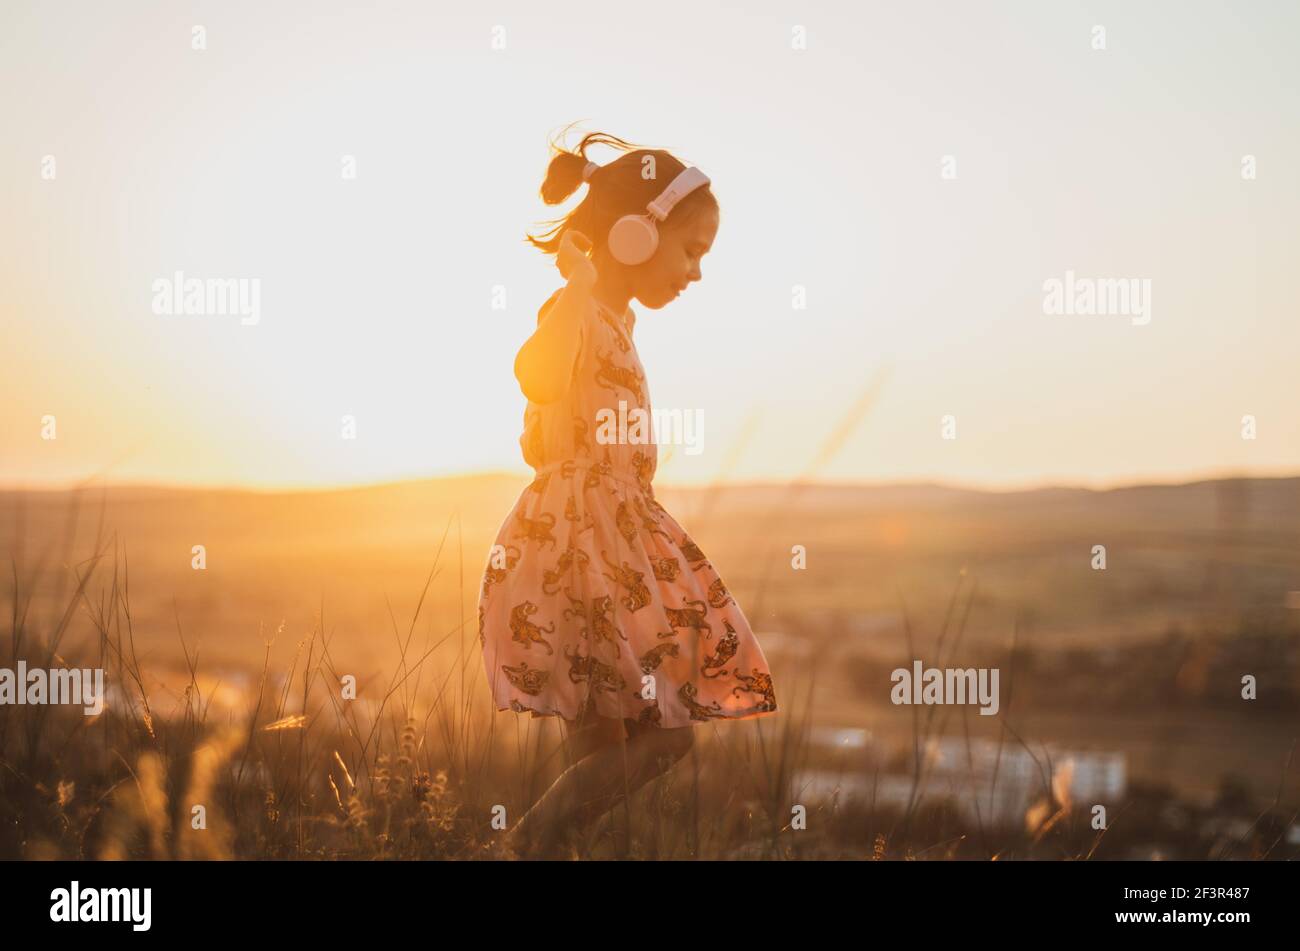 Side angle portrait of child with pink headphones and dress listening to music and dancing on a field at sunset Stock Photo